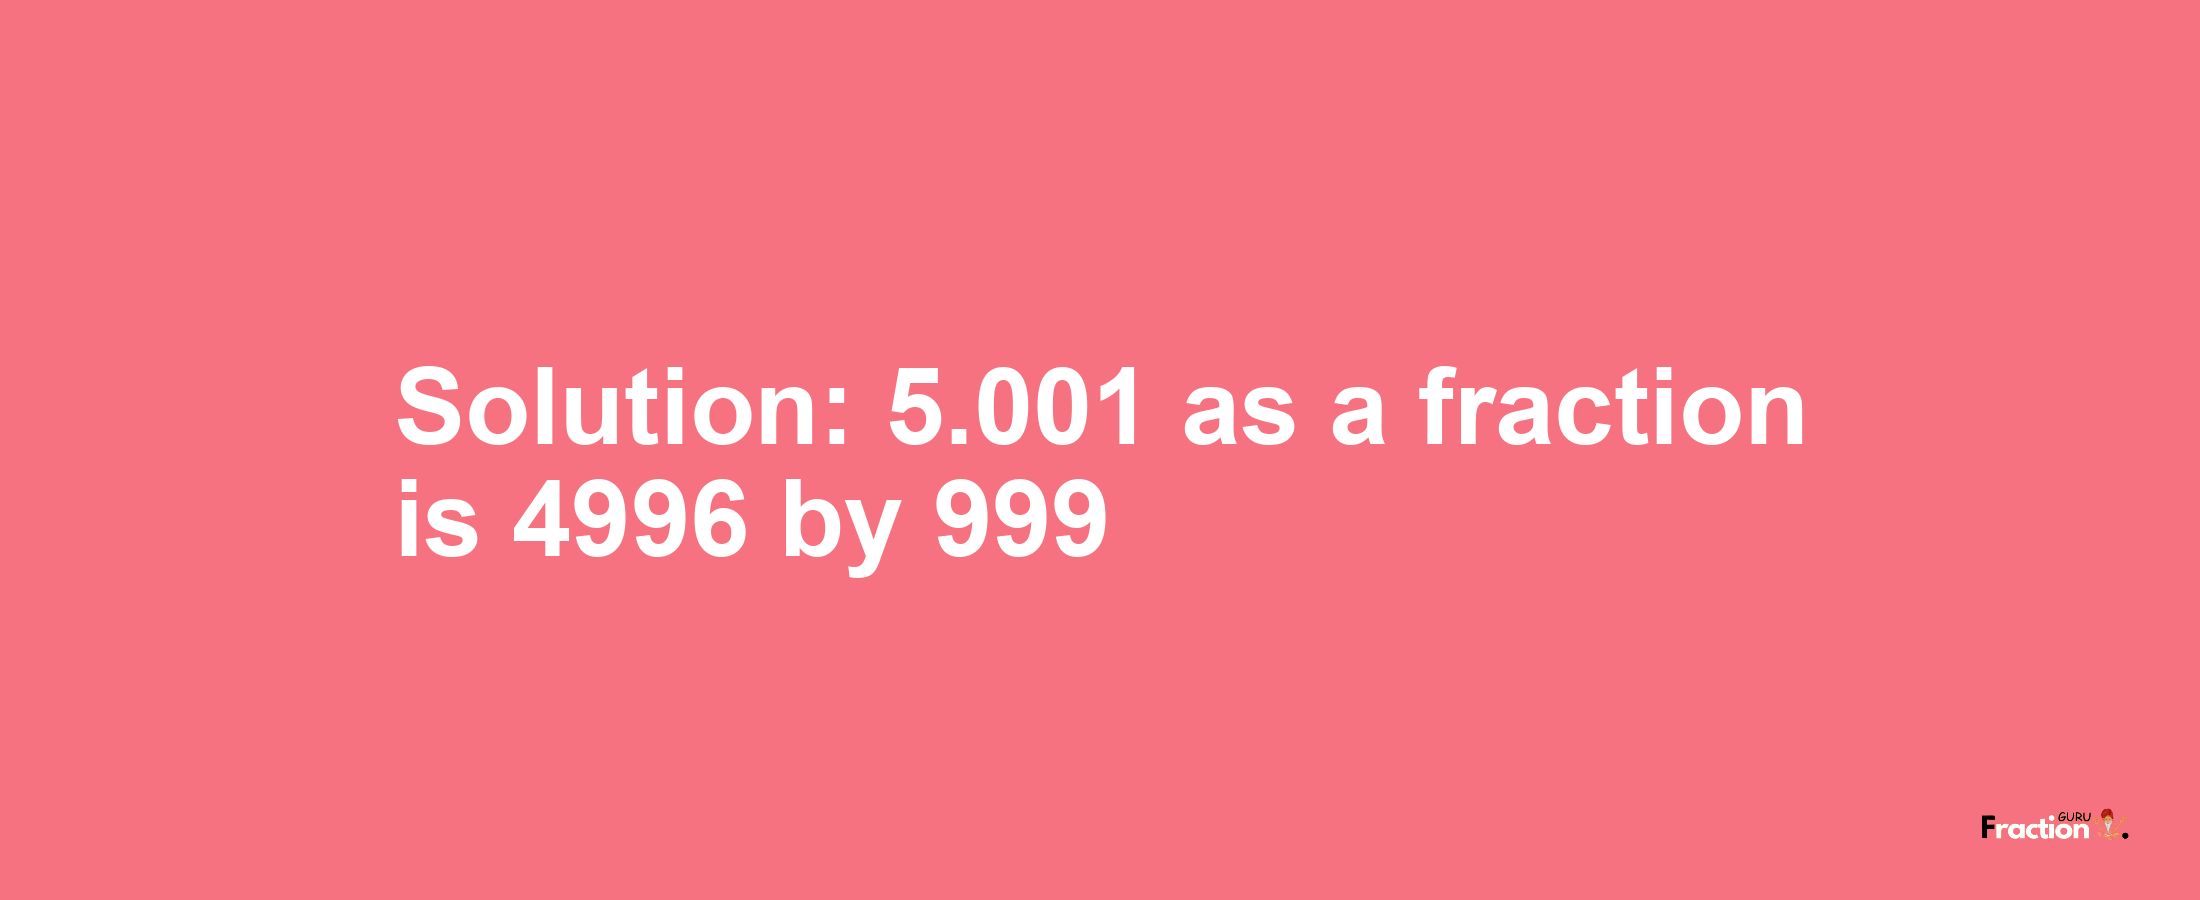 Solution:5.001 as a fraction is 4996/999